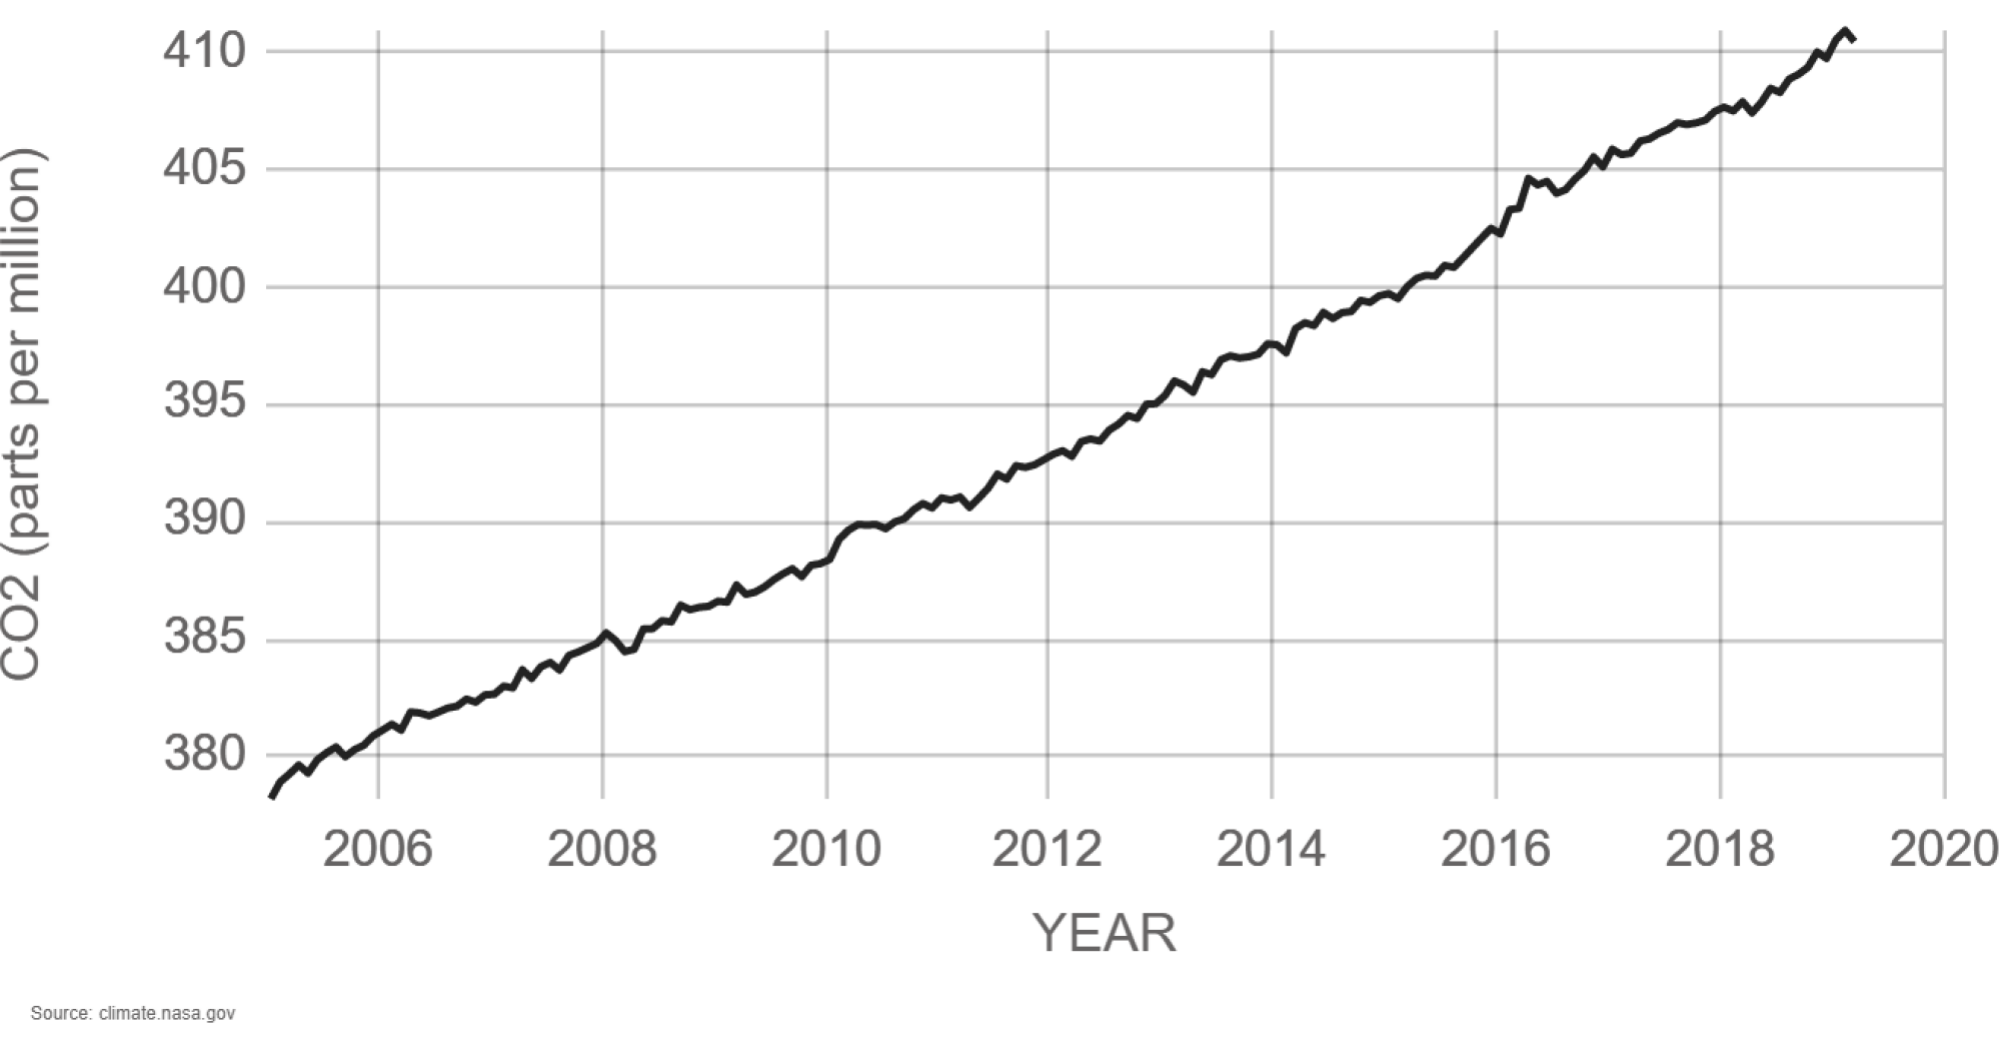 Rising CO2 ppm since around 2005.